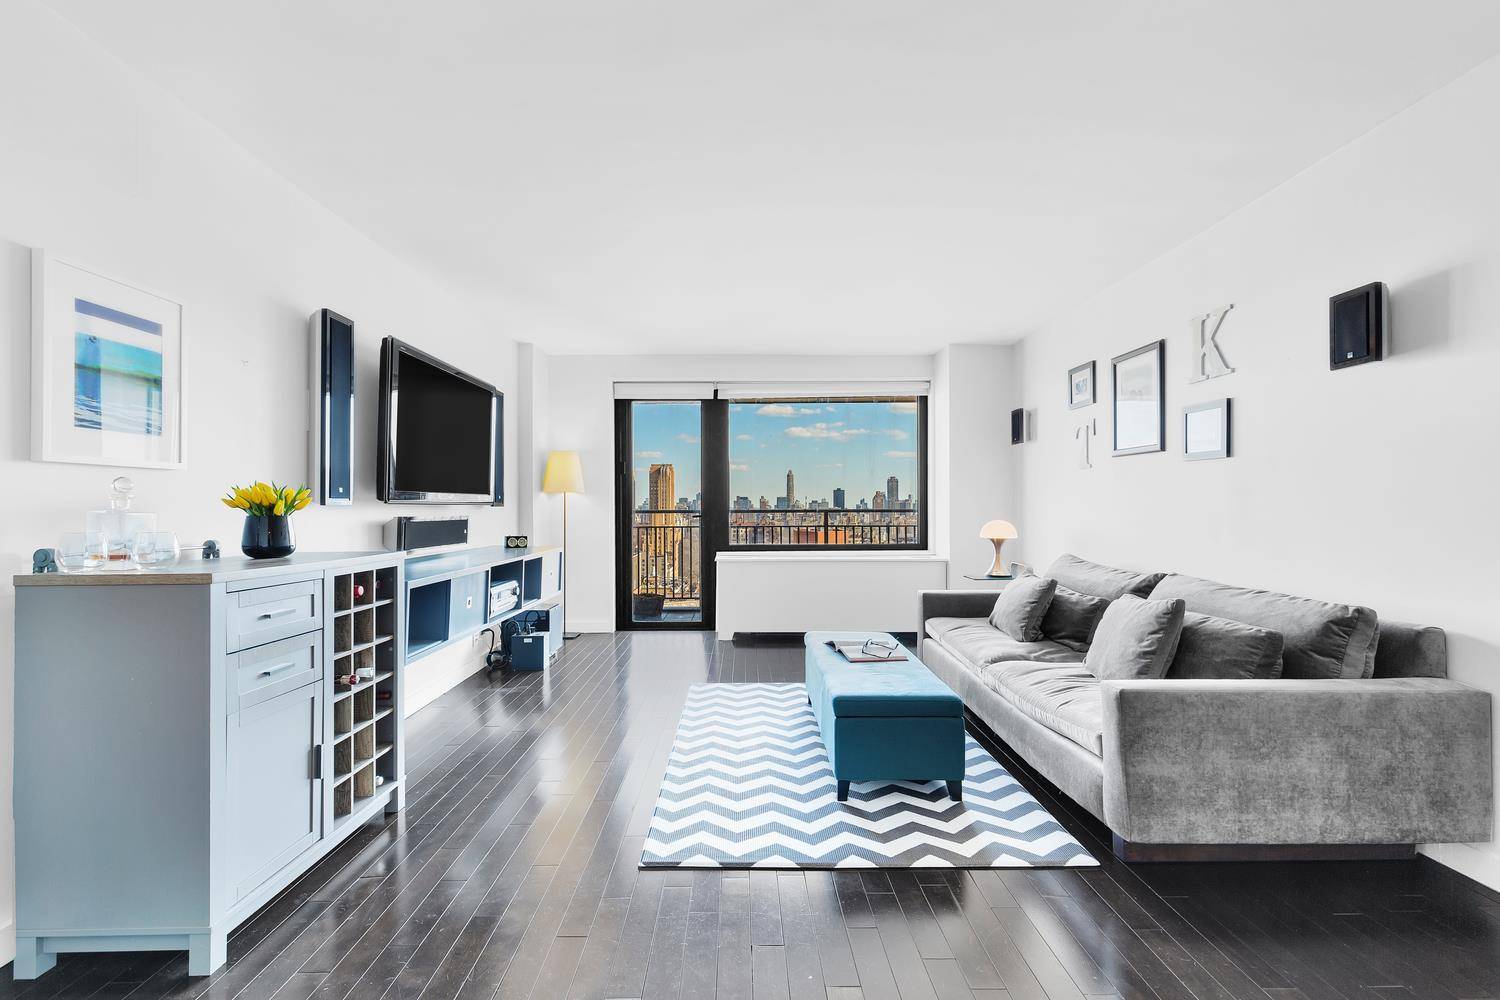 Located in a full service, white glove co op in the heart of the Upper West side, this pristine 1BR has an open layout, stunning kitchen and bathroom upgrades, and ...